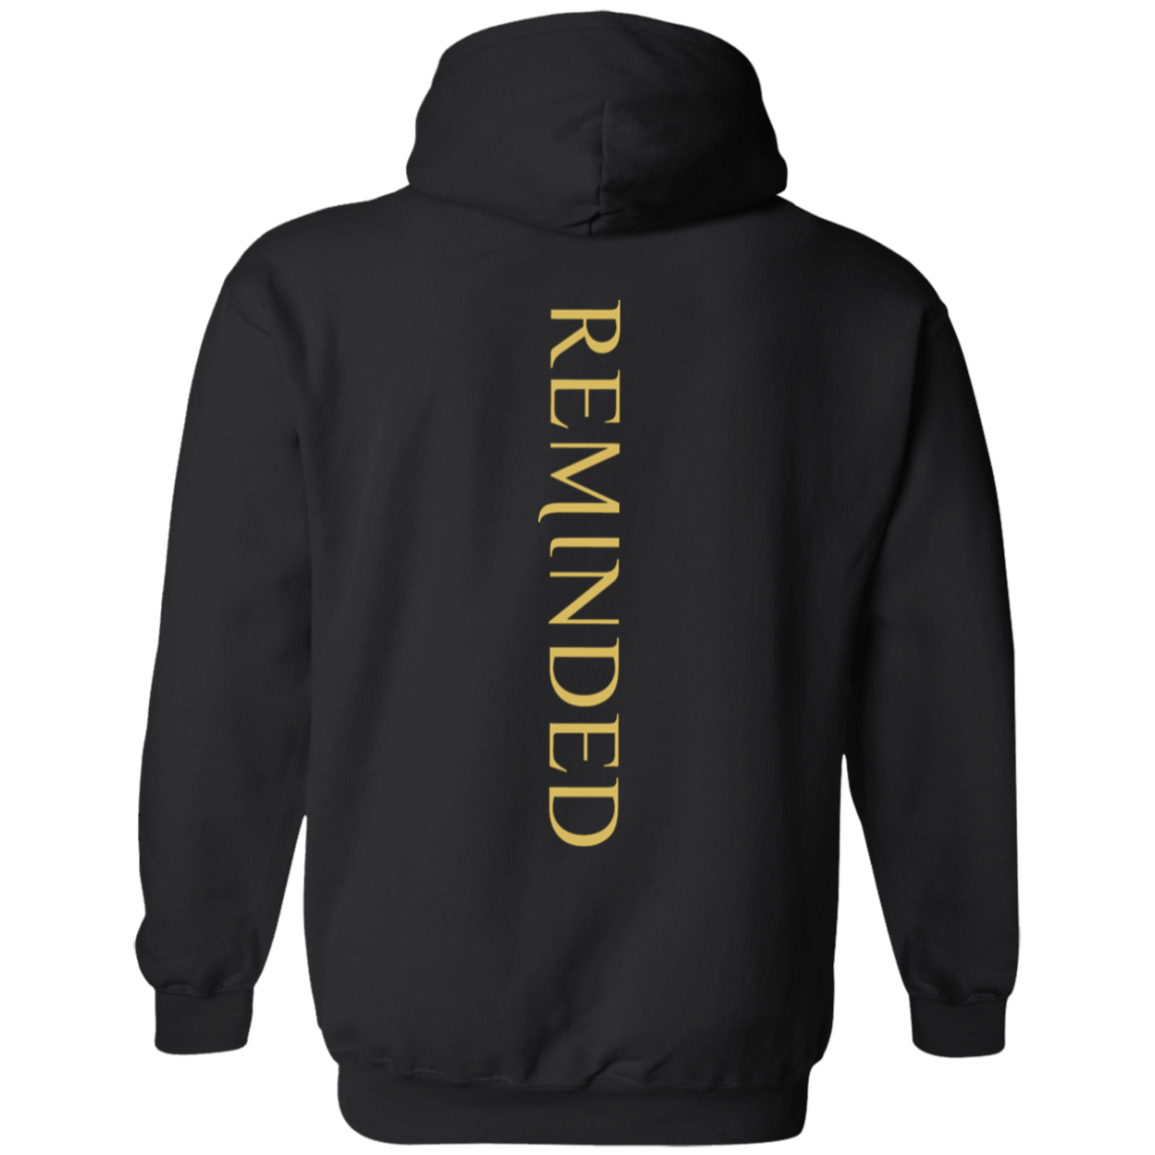 Reflect 4 Reminded Pullover Hoodie